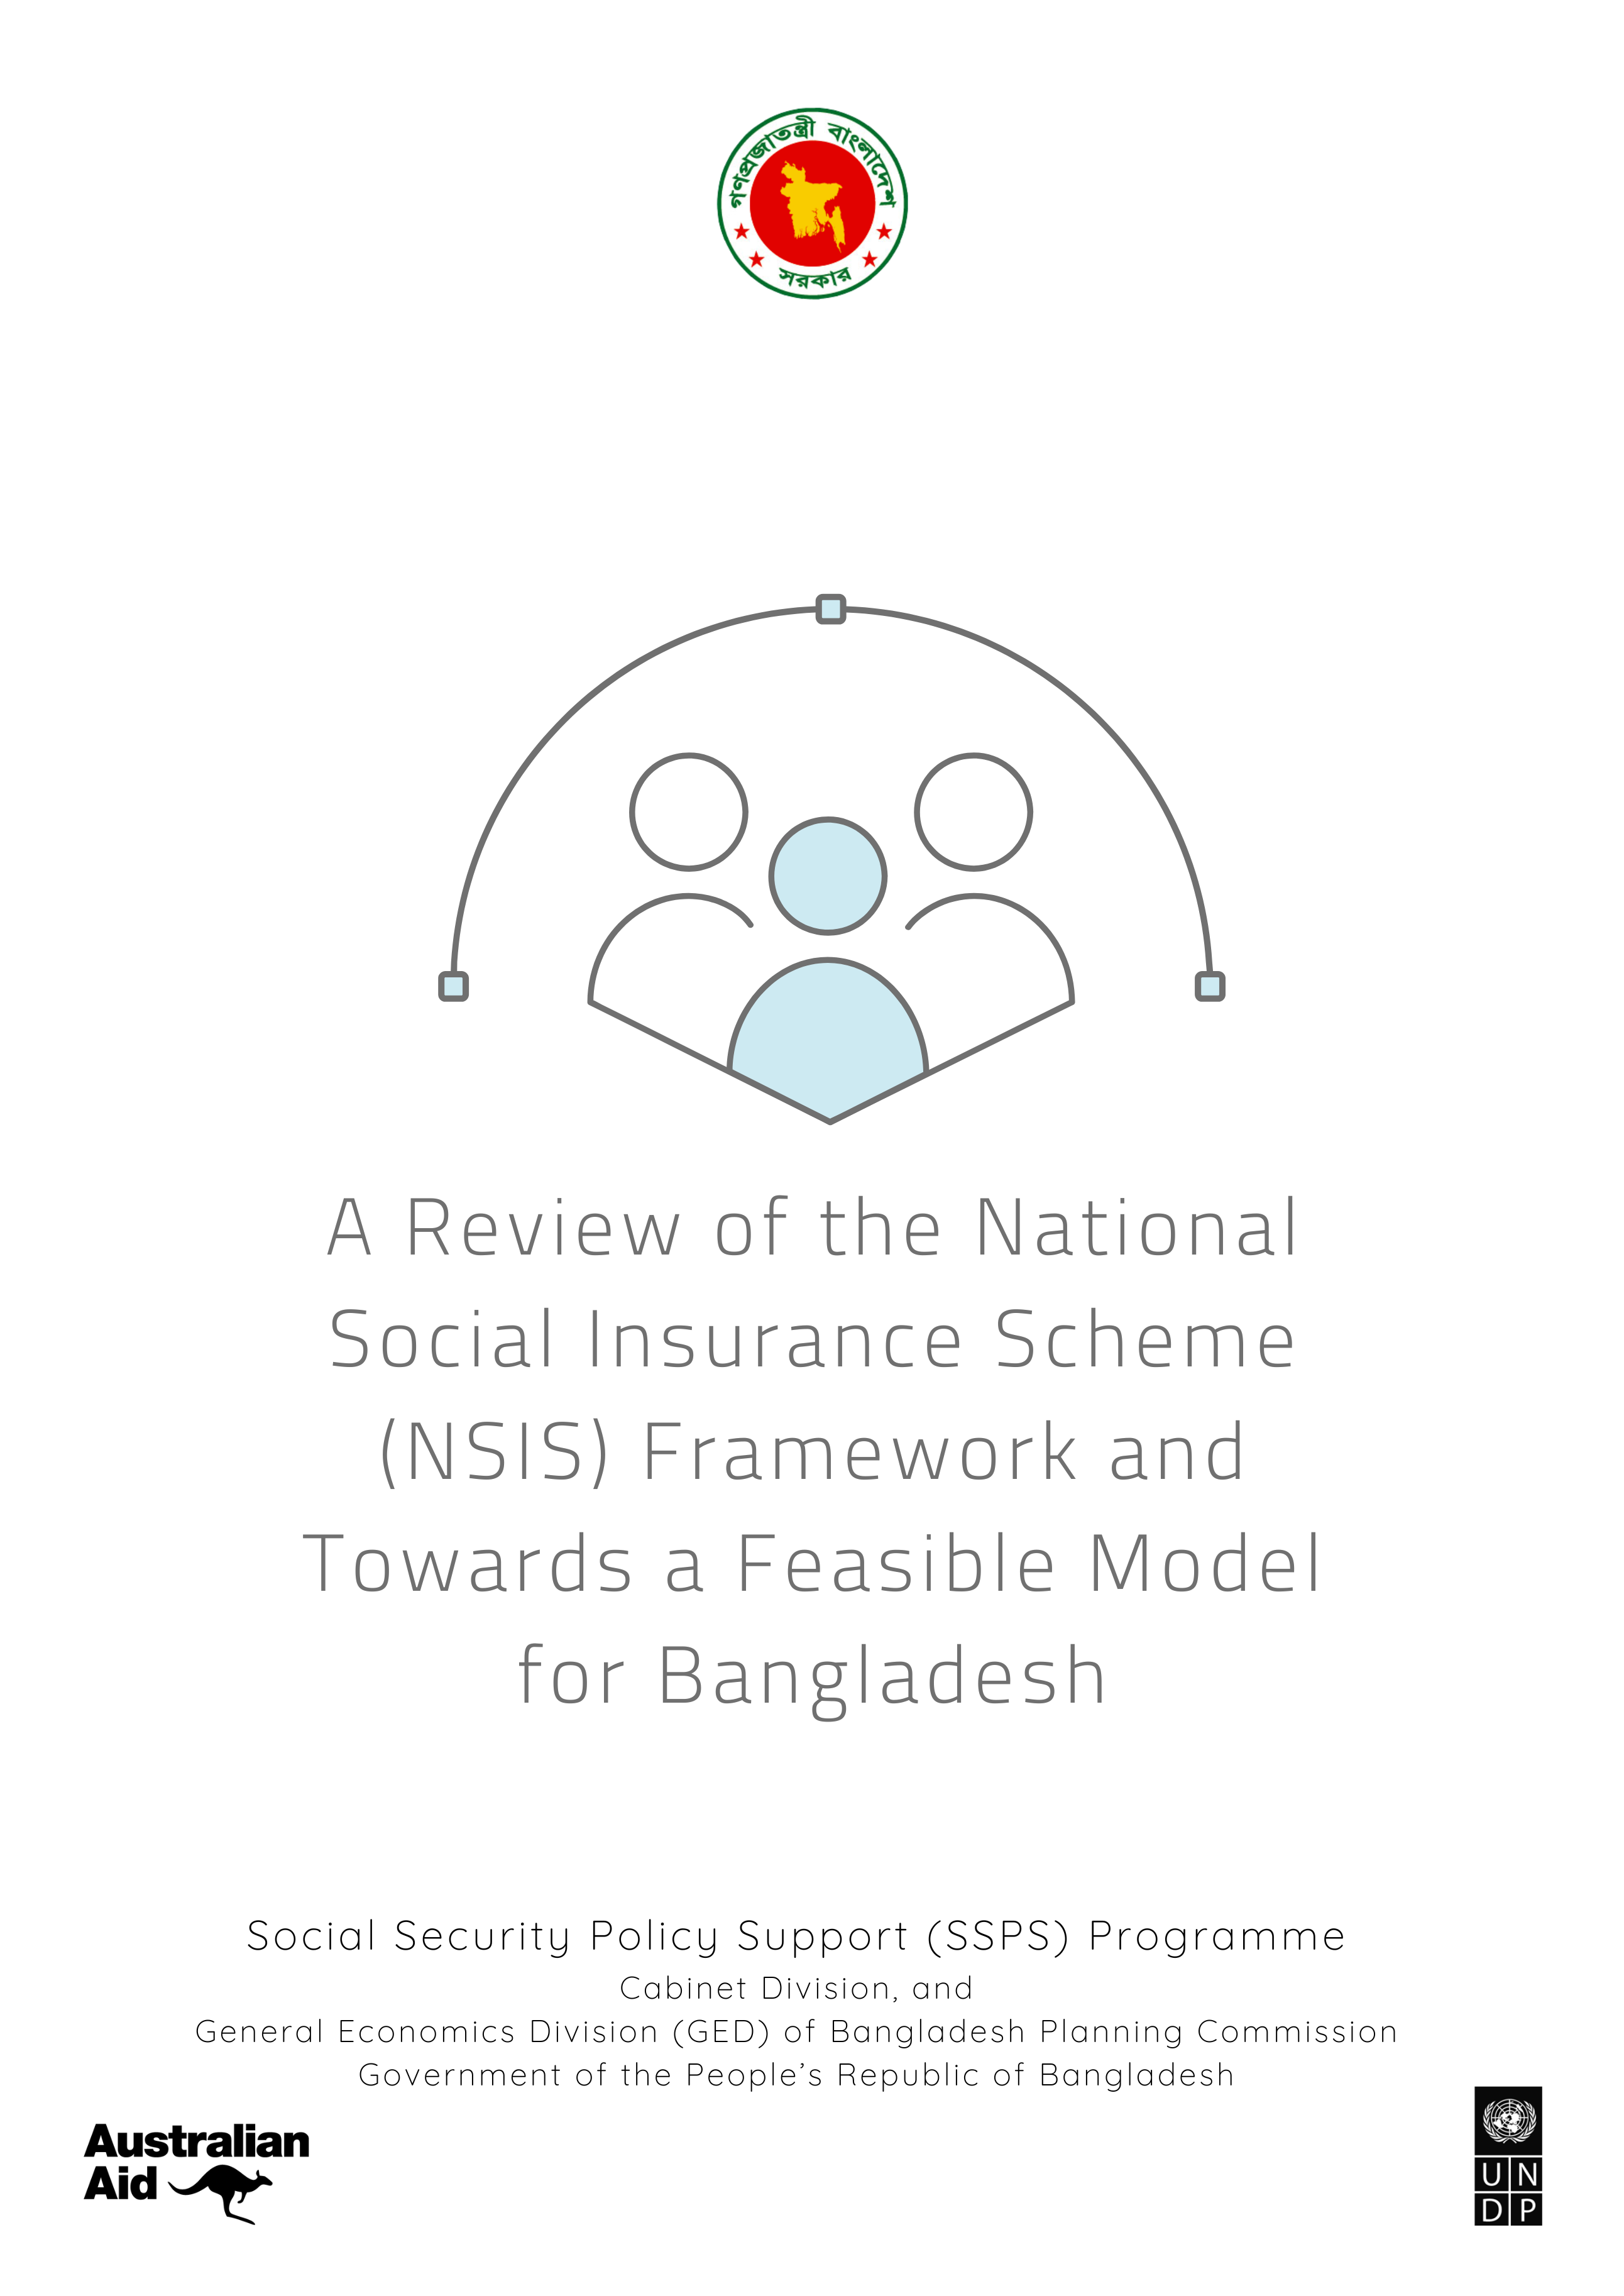 Reviewing the National Social Insurance Scheme (NSIS) Framework and towards a Feasible Model for Bangladesh